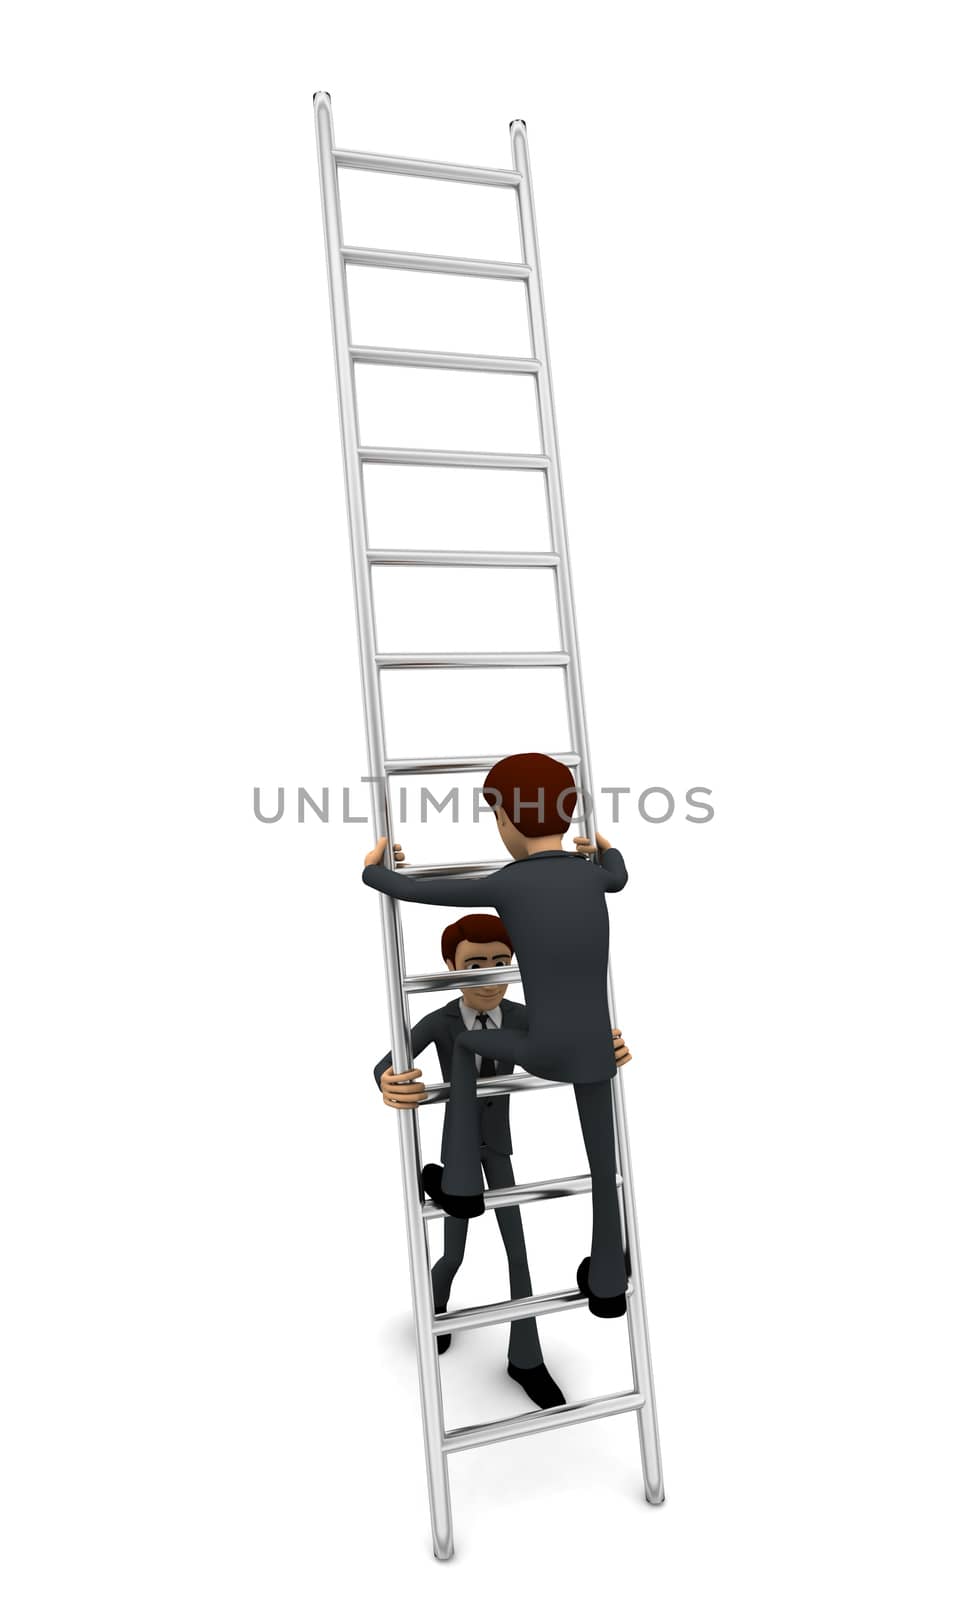 3d man climbing ladder supported by another man concept on white background, back angle view